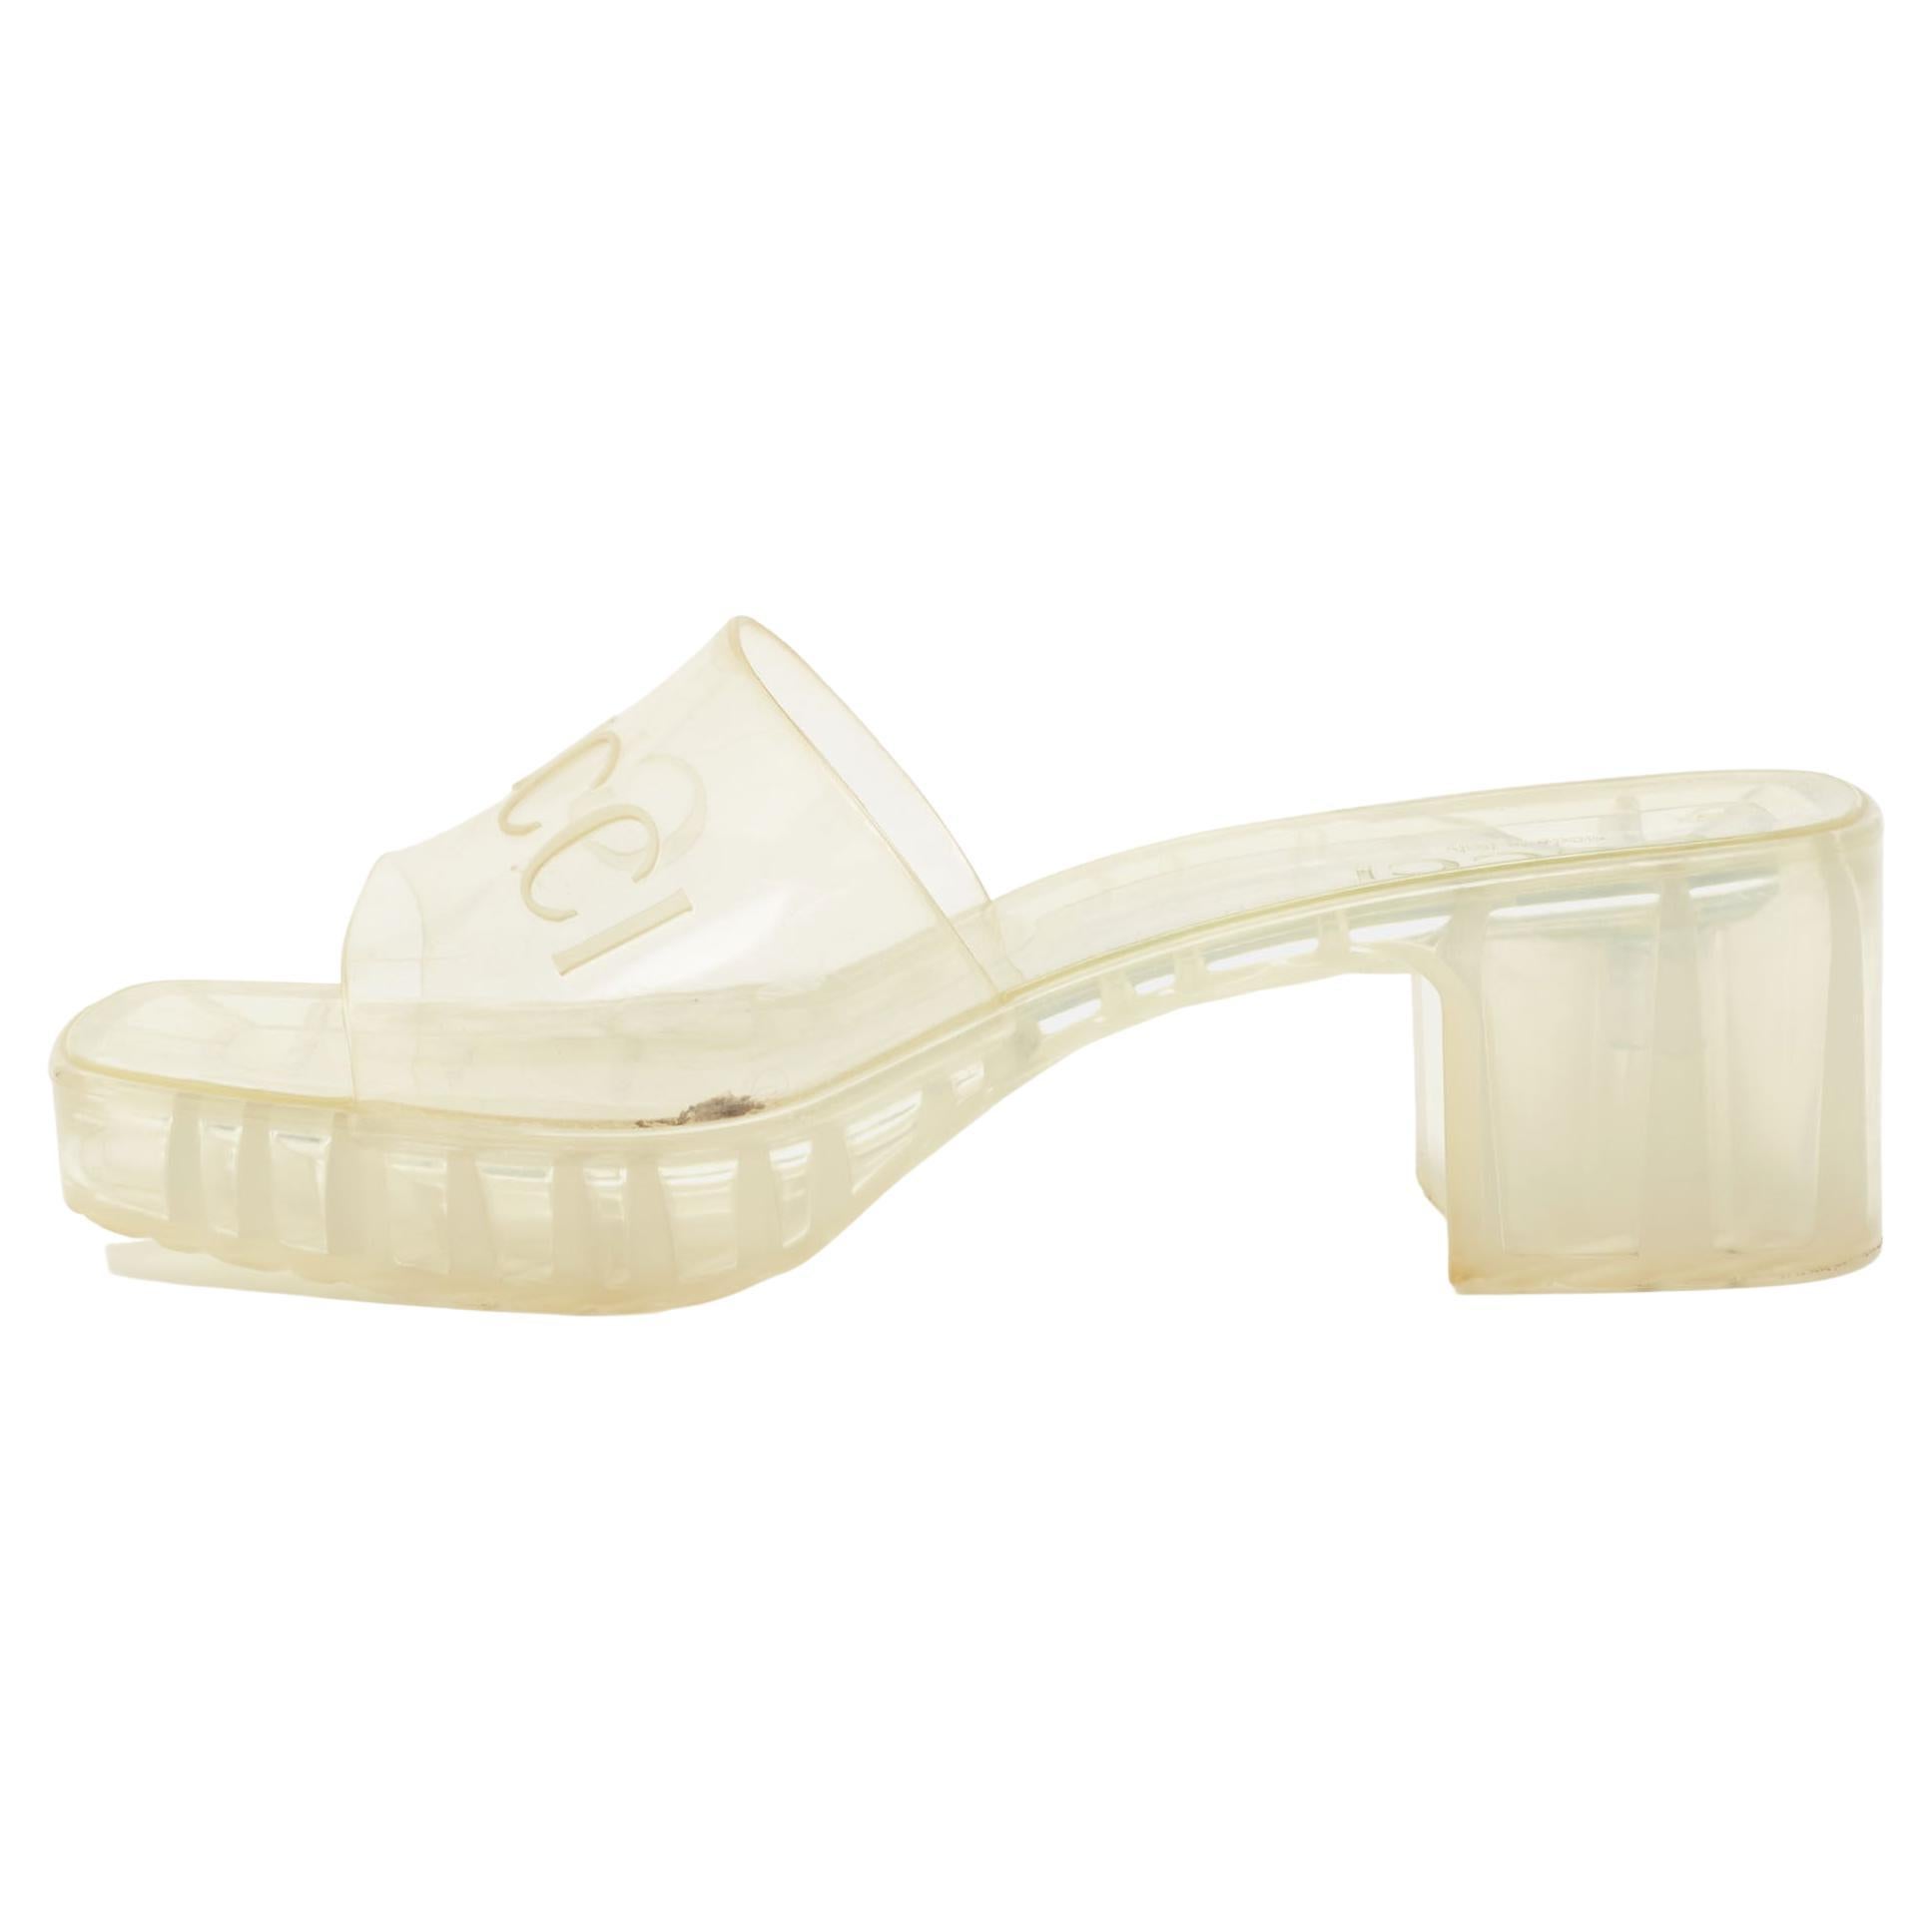 Shop Off-White Logo-Embossed Jelly Sandals